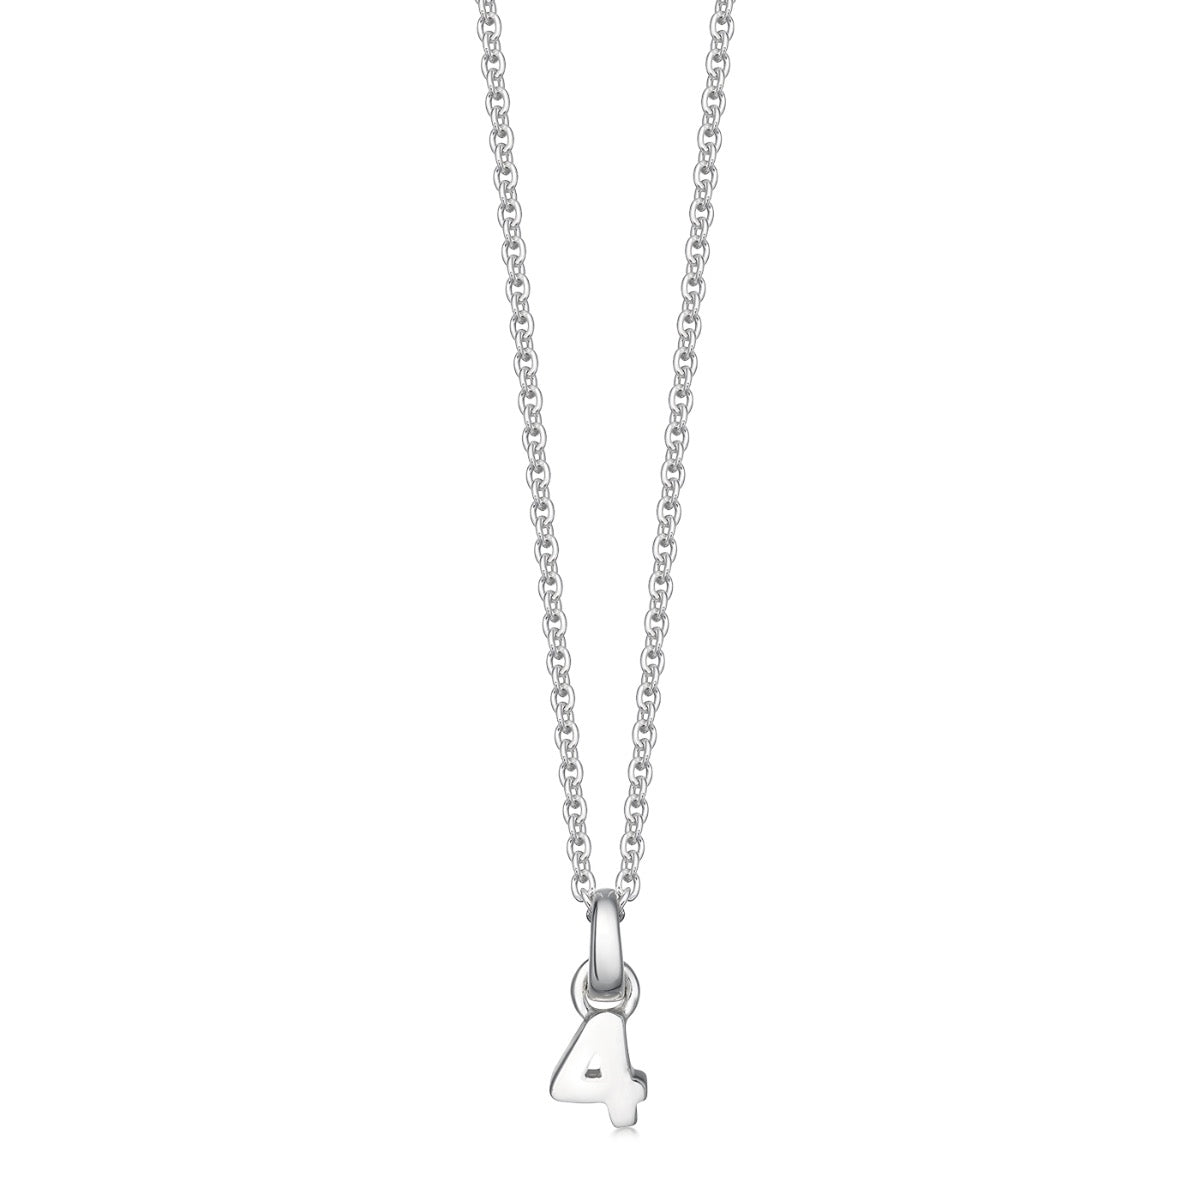 Silver Number 4 Pendant Necklace | |Hersey & Son Silversmiths